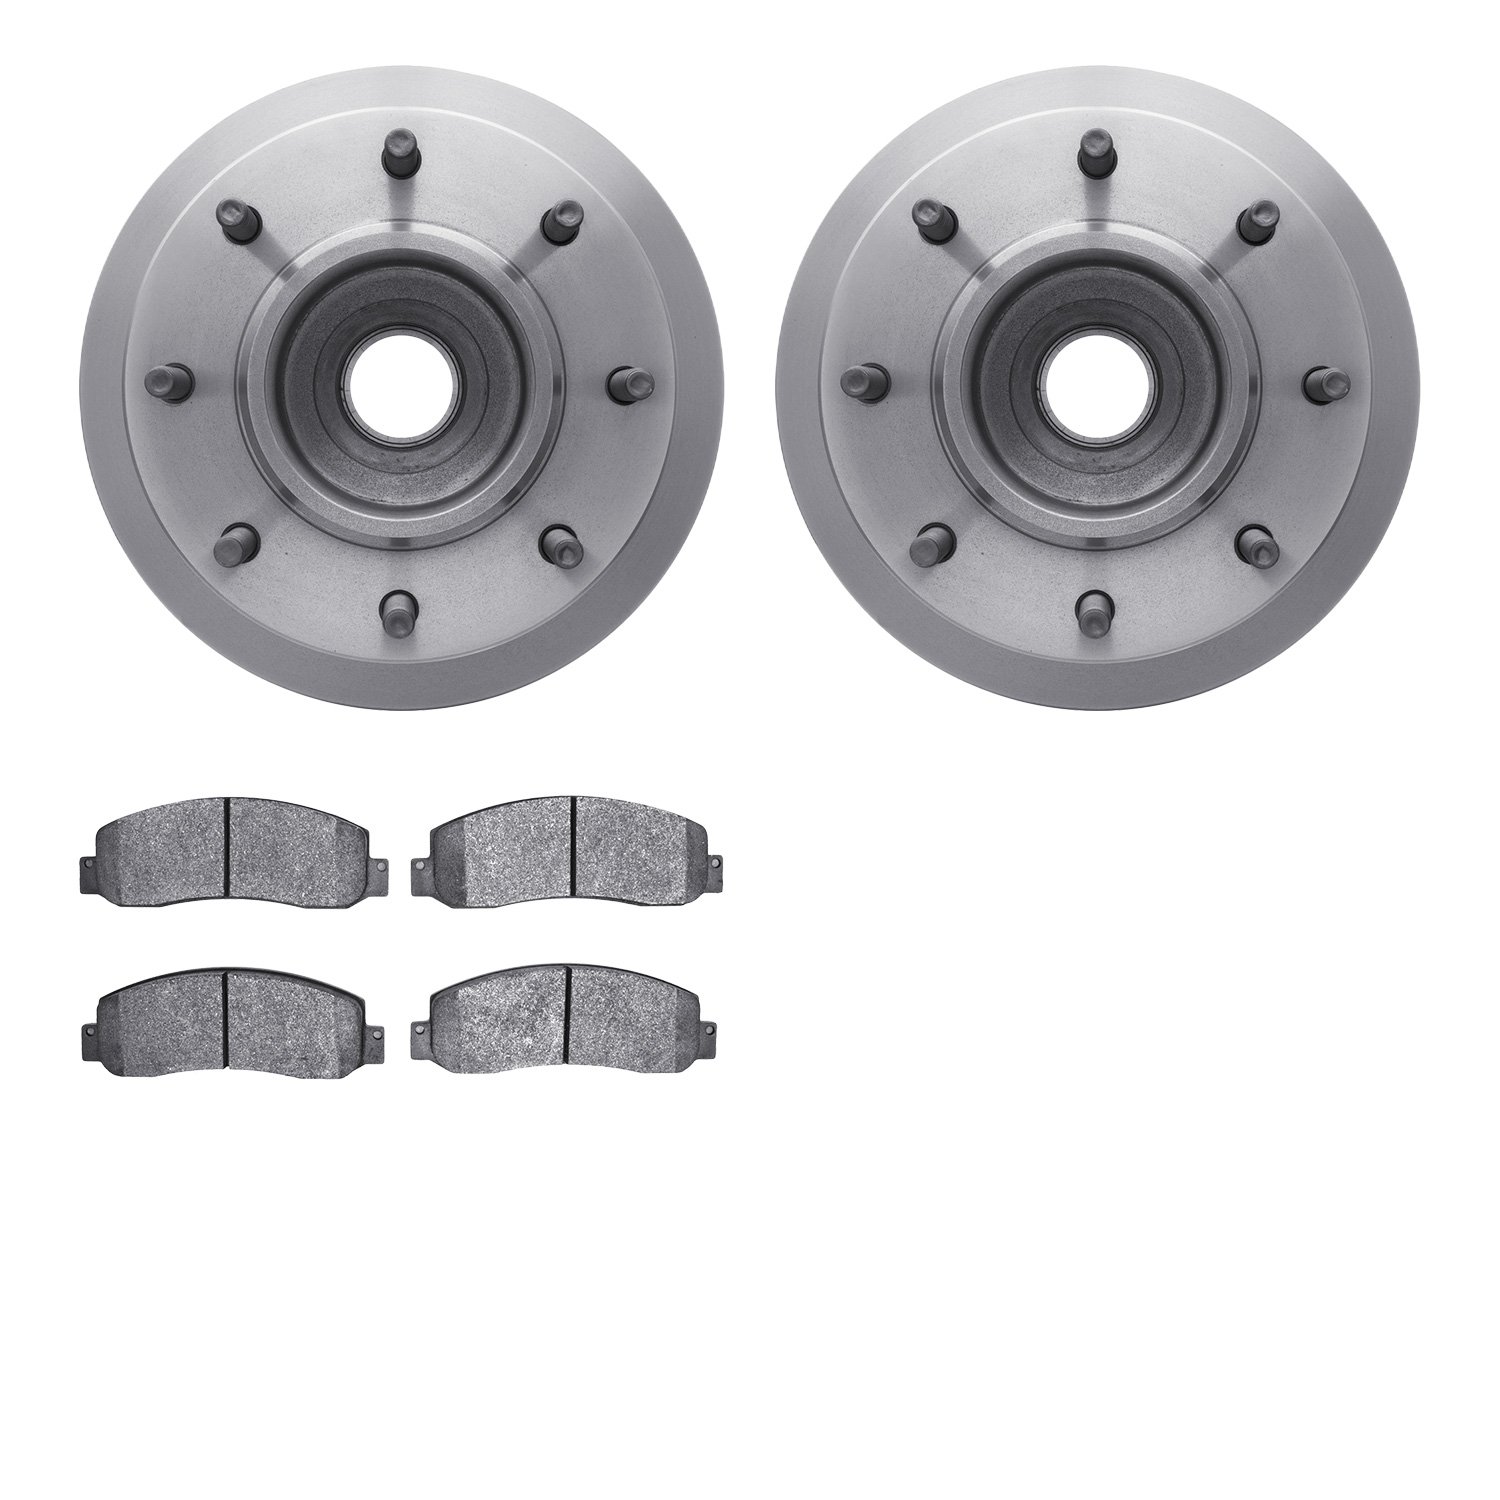 6402-54260 Brake Rotors with Ultimate-Duty Brake Pads, 2005-2007 Ford/Lincoln/Mercury/Mazda, Position: Front